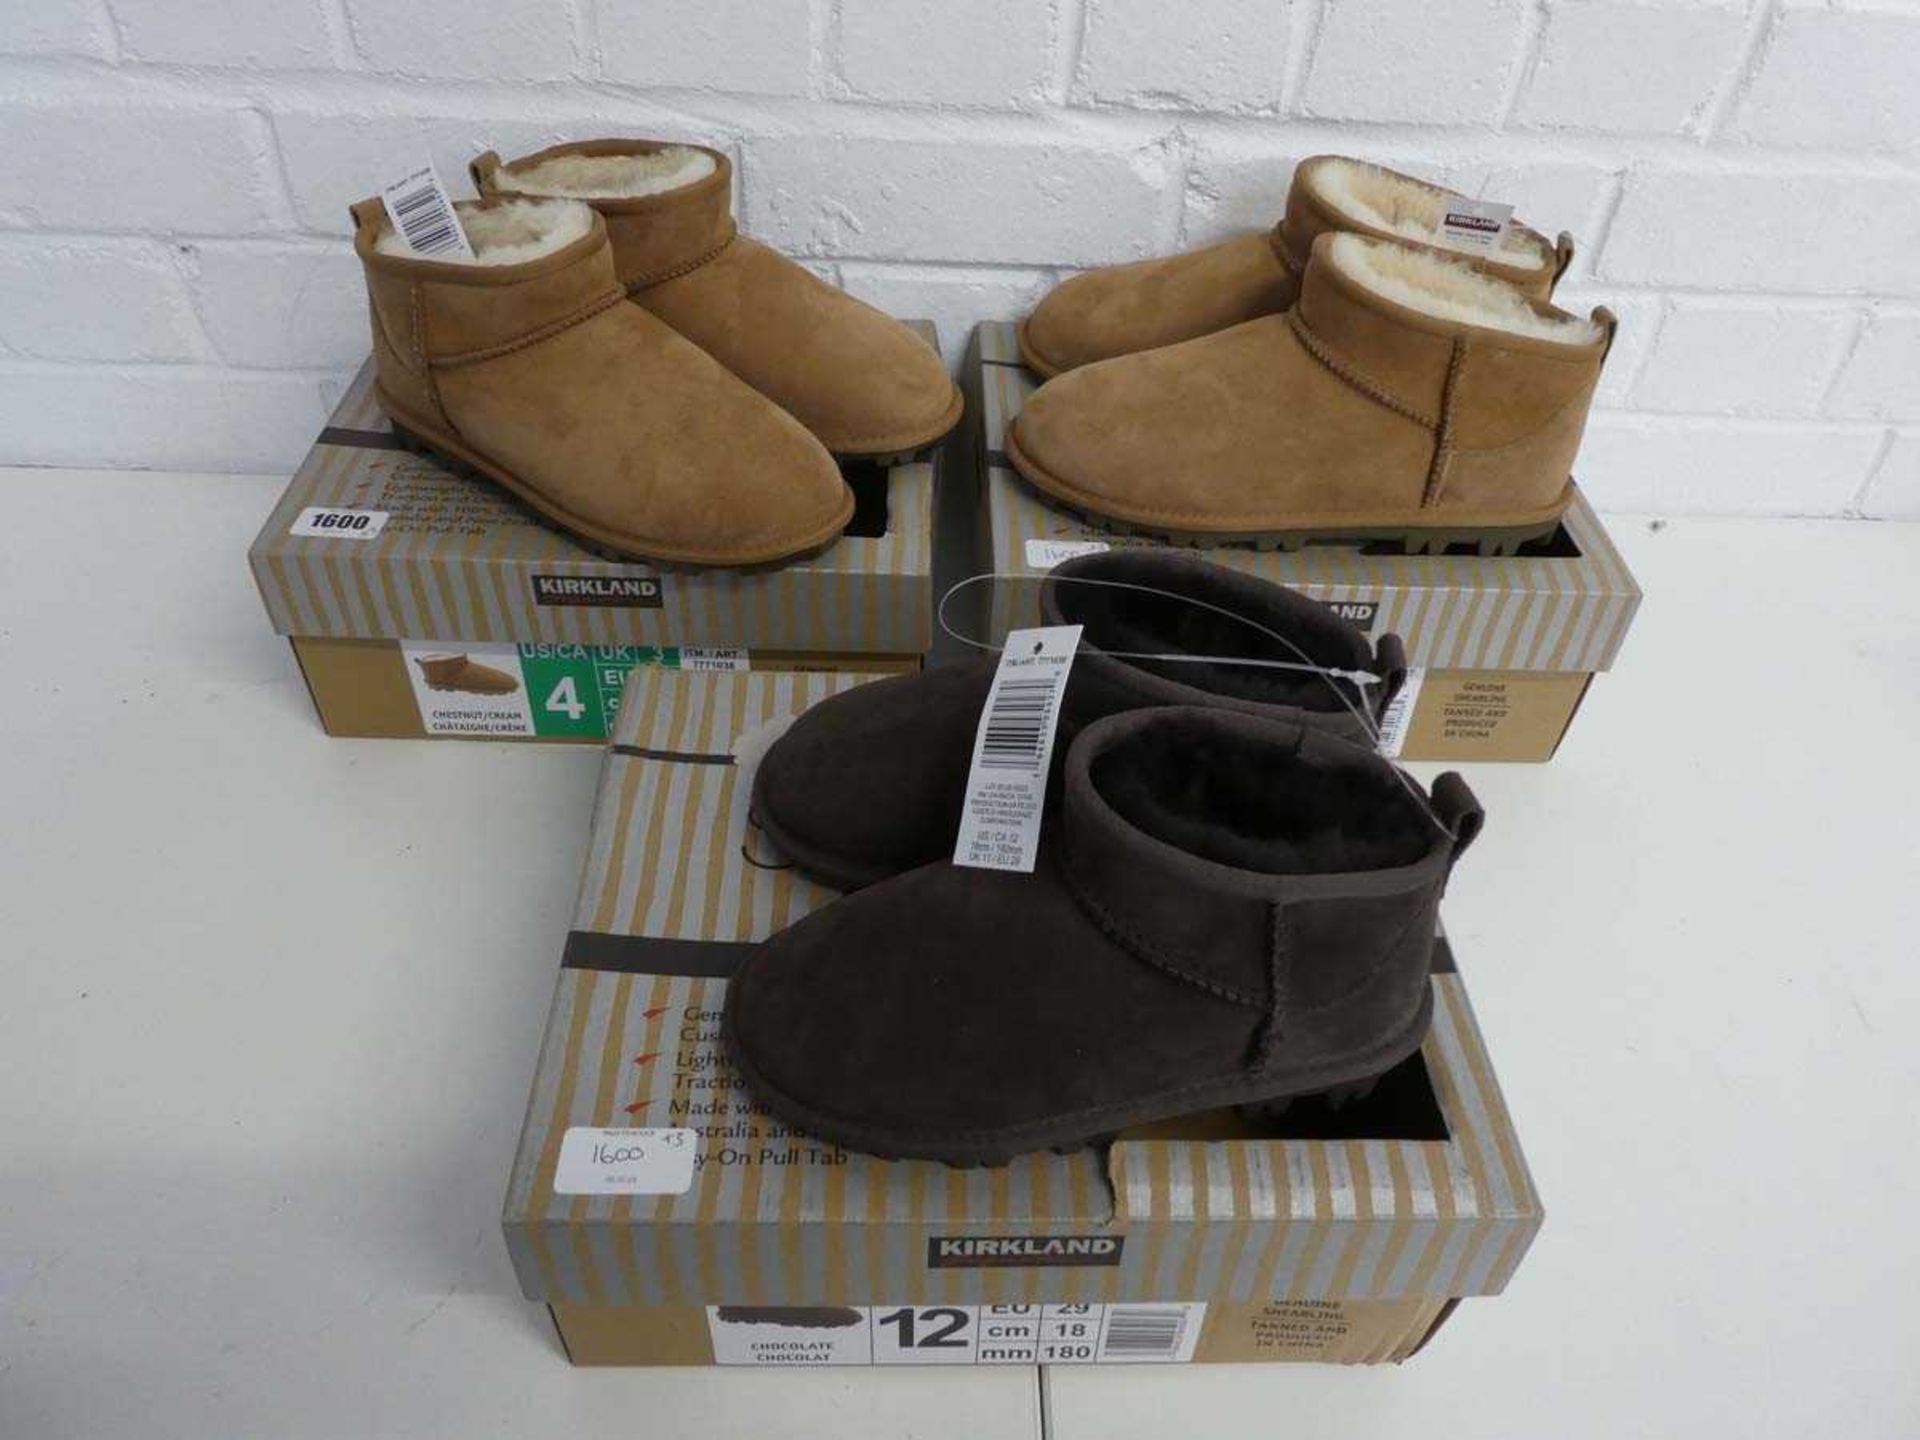 3 boxed pairs of kids kirkland shearling ankle boots (2 chestnut - size 3&4. 1 brown size 11)